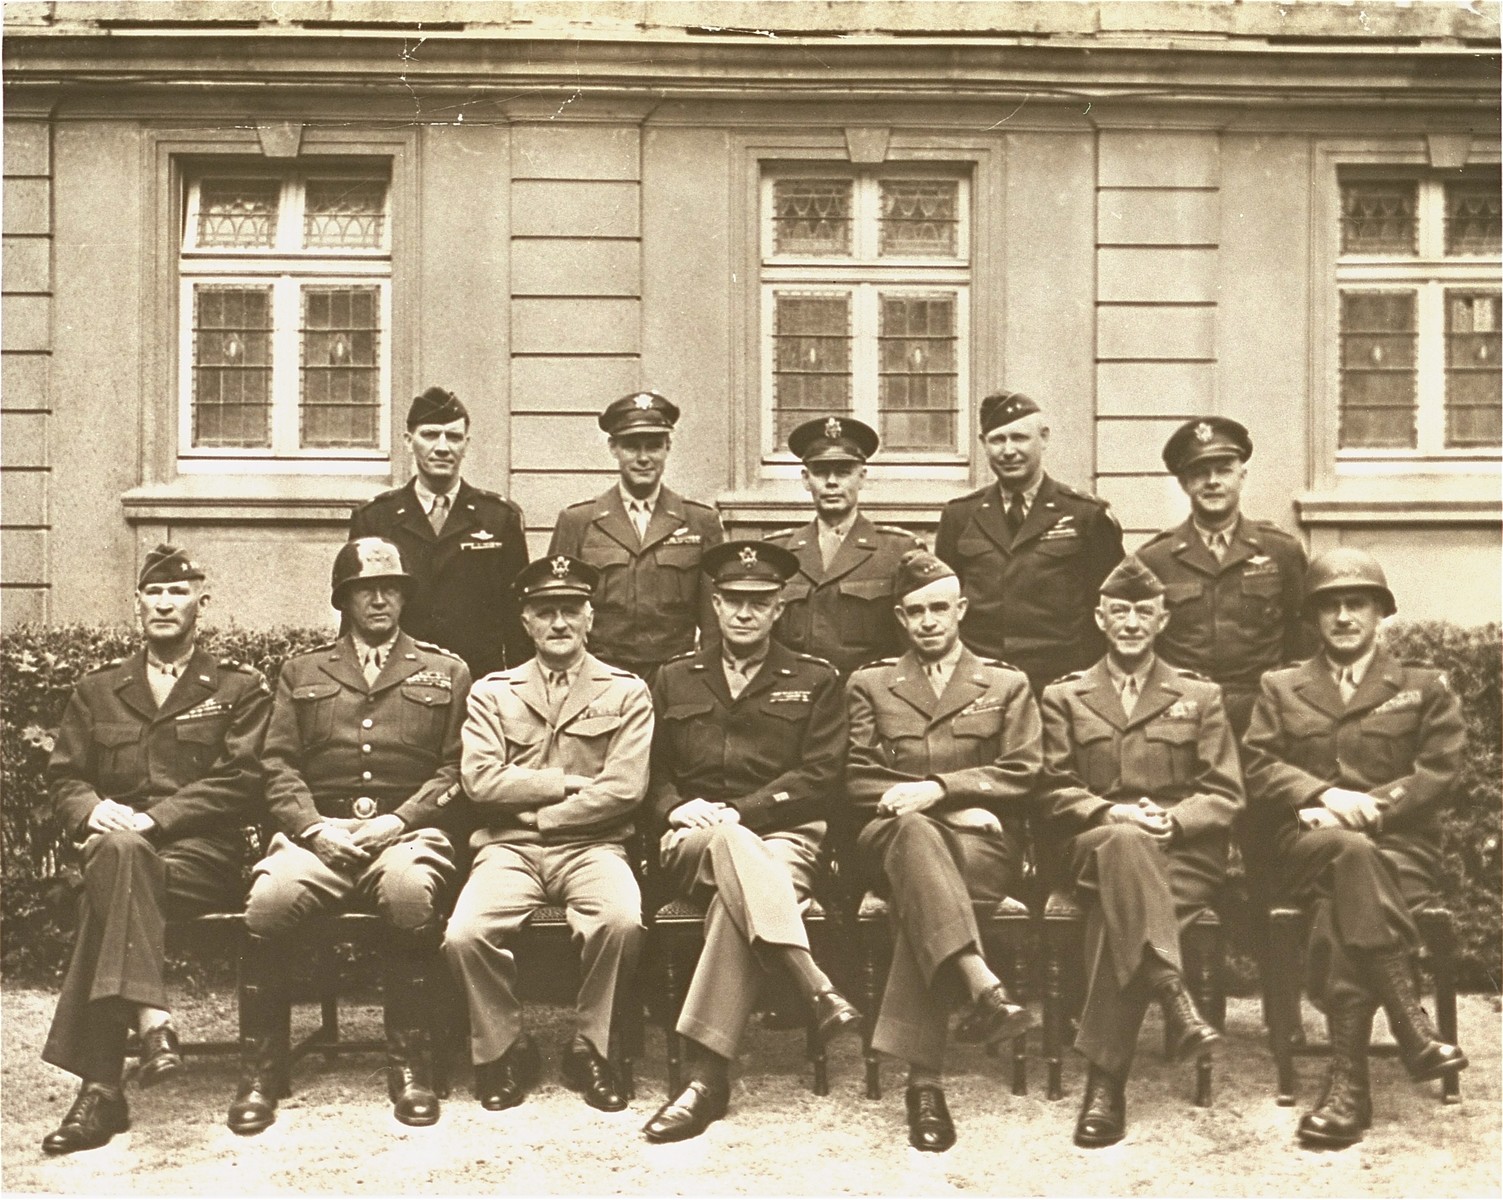 American generals who helped pave the way to victory are photographed during a victory meeting at Gen. Omar N. Bradley's 12th Army group headquarters. 

Seated left to right: Lt. Gen. Wm. H. Simpson, Gen. George Patton, Jr., Gen. Carl A. Spaatz, Gen. Dwight D. Eisenhower, Gen. Omar N. Bradley, Gen. Courtney H. Hodges, Lt. Gen. Leonard T. Gerow. Standing left to right: Brig. Gen. Ralph F. Stearley, Lt. Gen. Walter B. Smith, Maj. Gen. Otto P. Weyland, Brig. Gen. Richard E. Nugent.